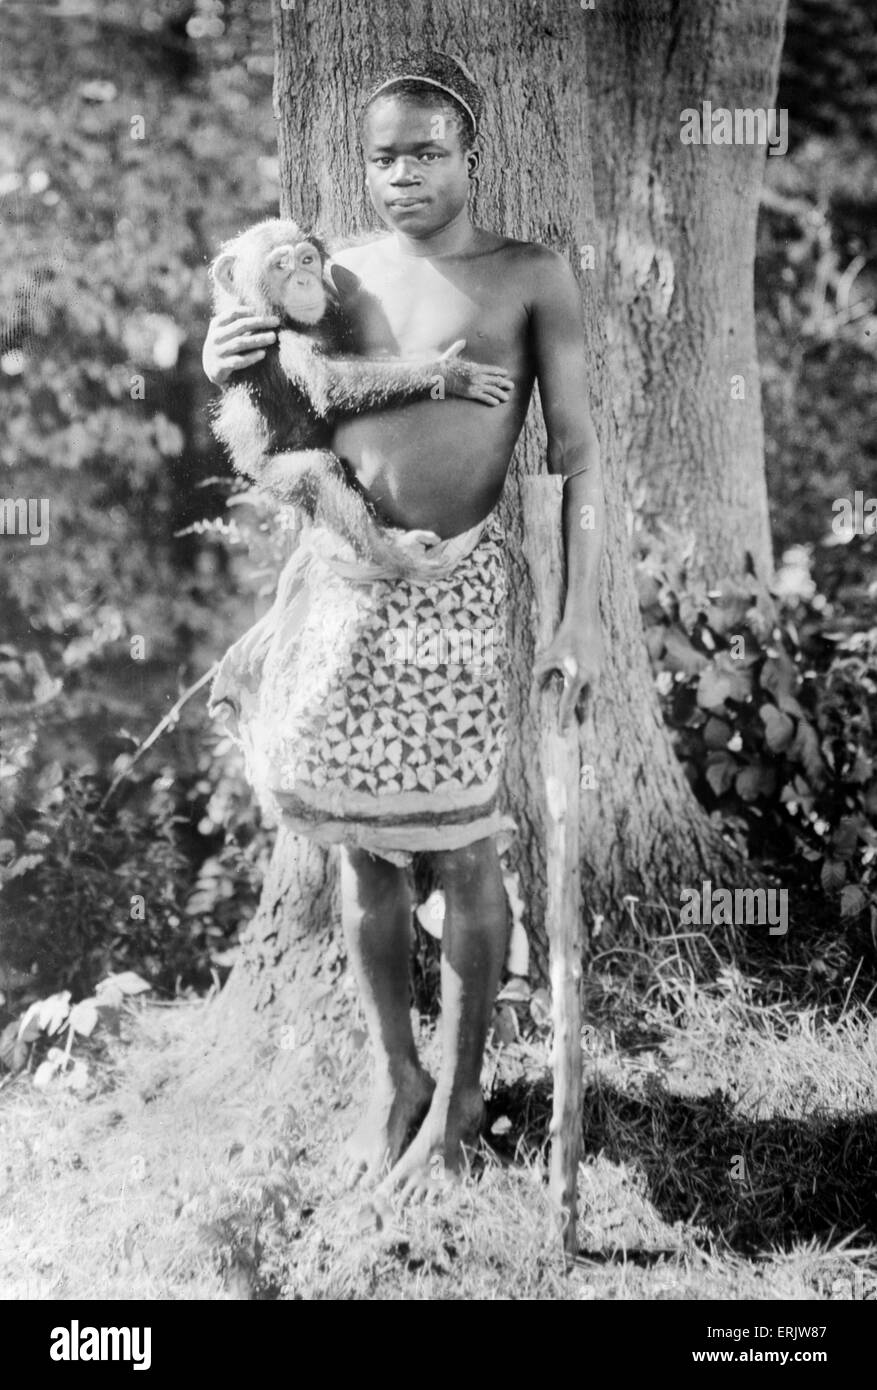 Ota Benga or Ota Bengi, Congolese man, an Mbuti pygmy known for being featured in an anthropology exhibit at the Louisiana Purchase Exposition in St. Louis, Missouri in 1904, and in a controversial human zoo exhibit in 1906 at the Bronx Zoo. Stock Photo